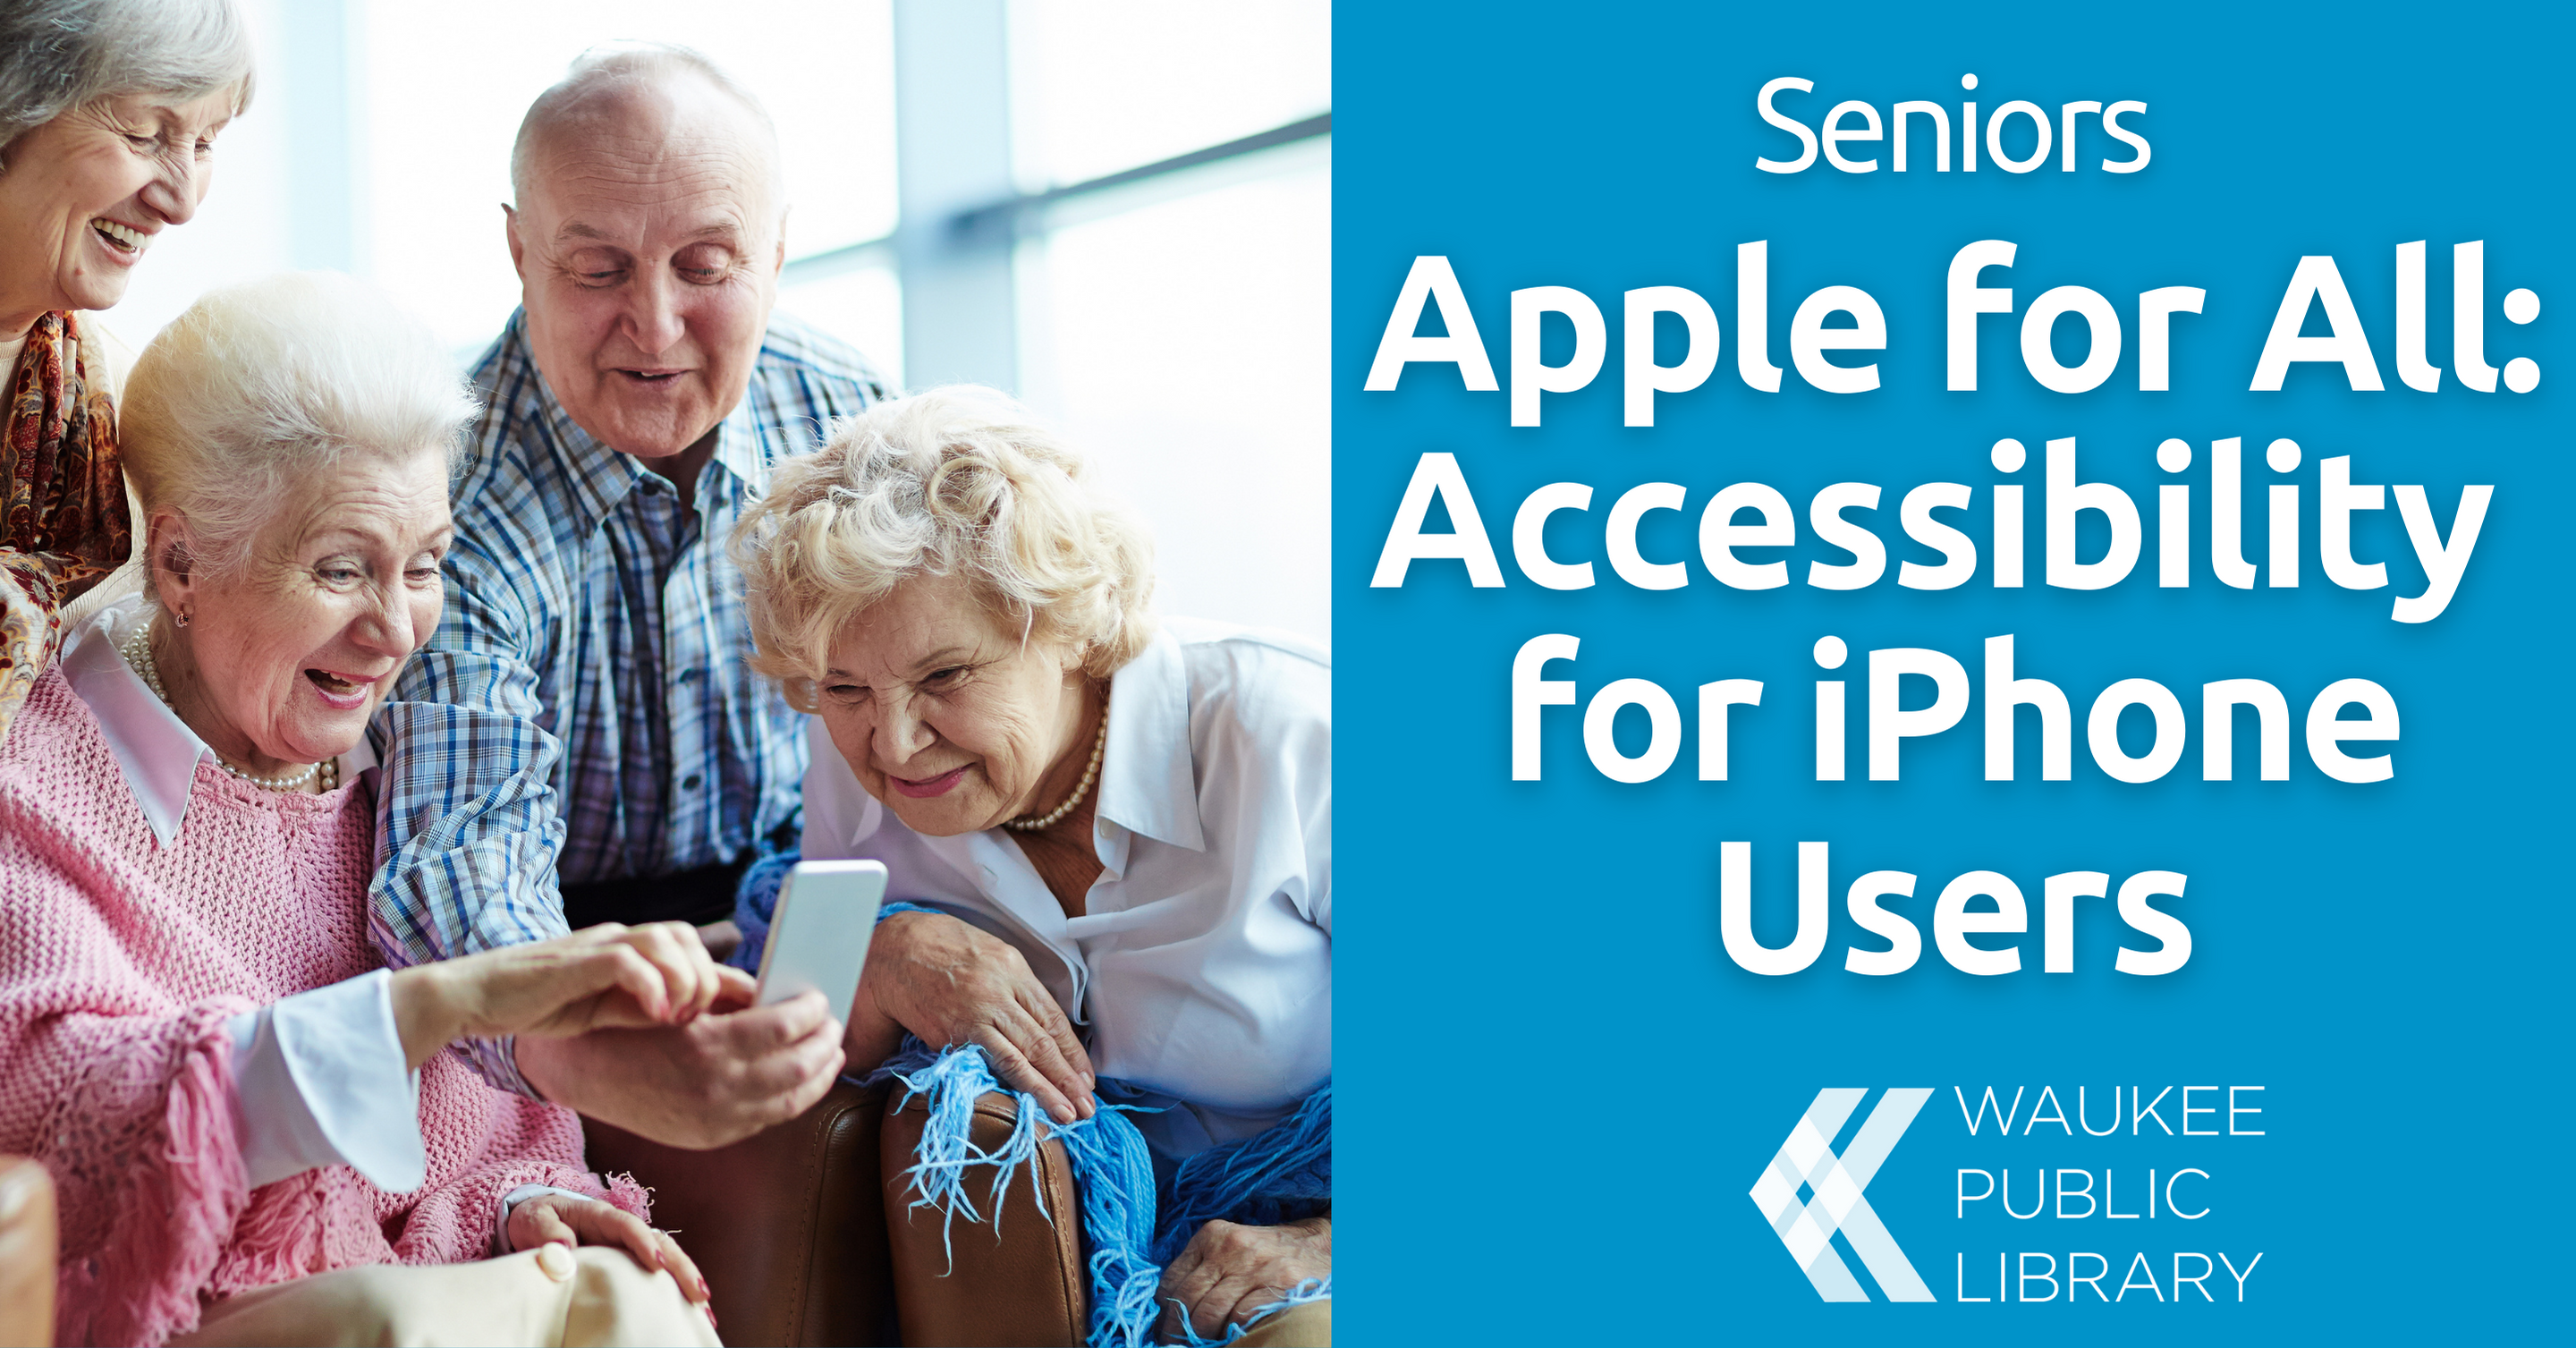 Apple for All: Accessibility for iPhone Users